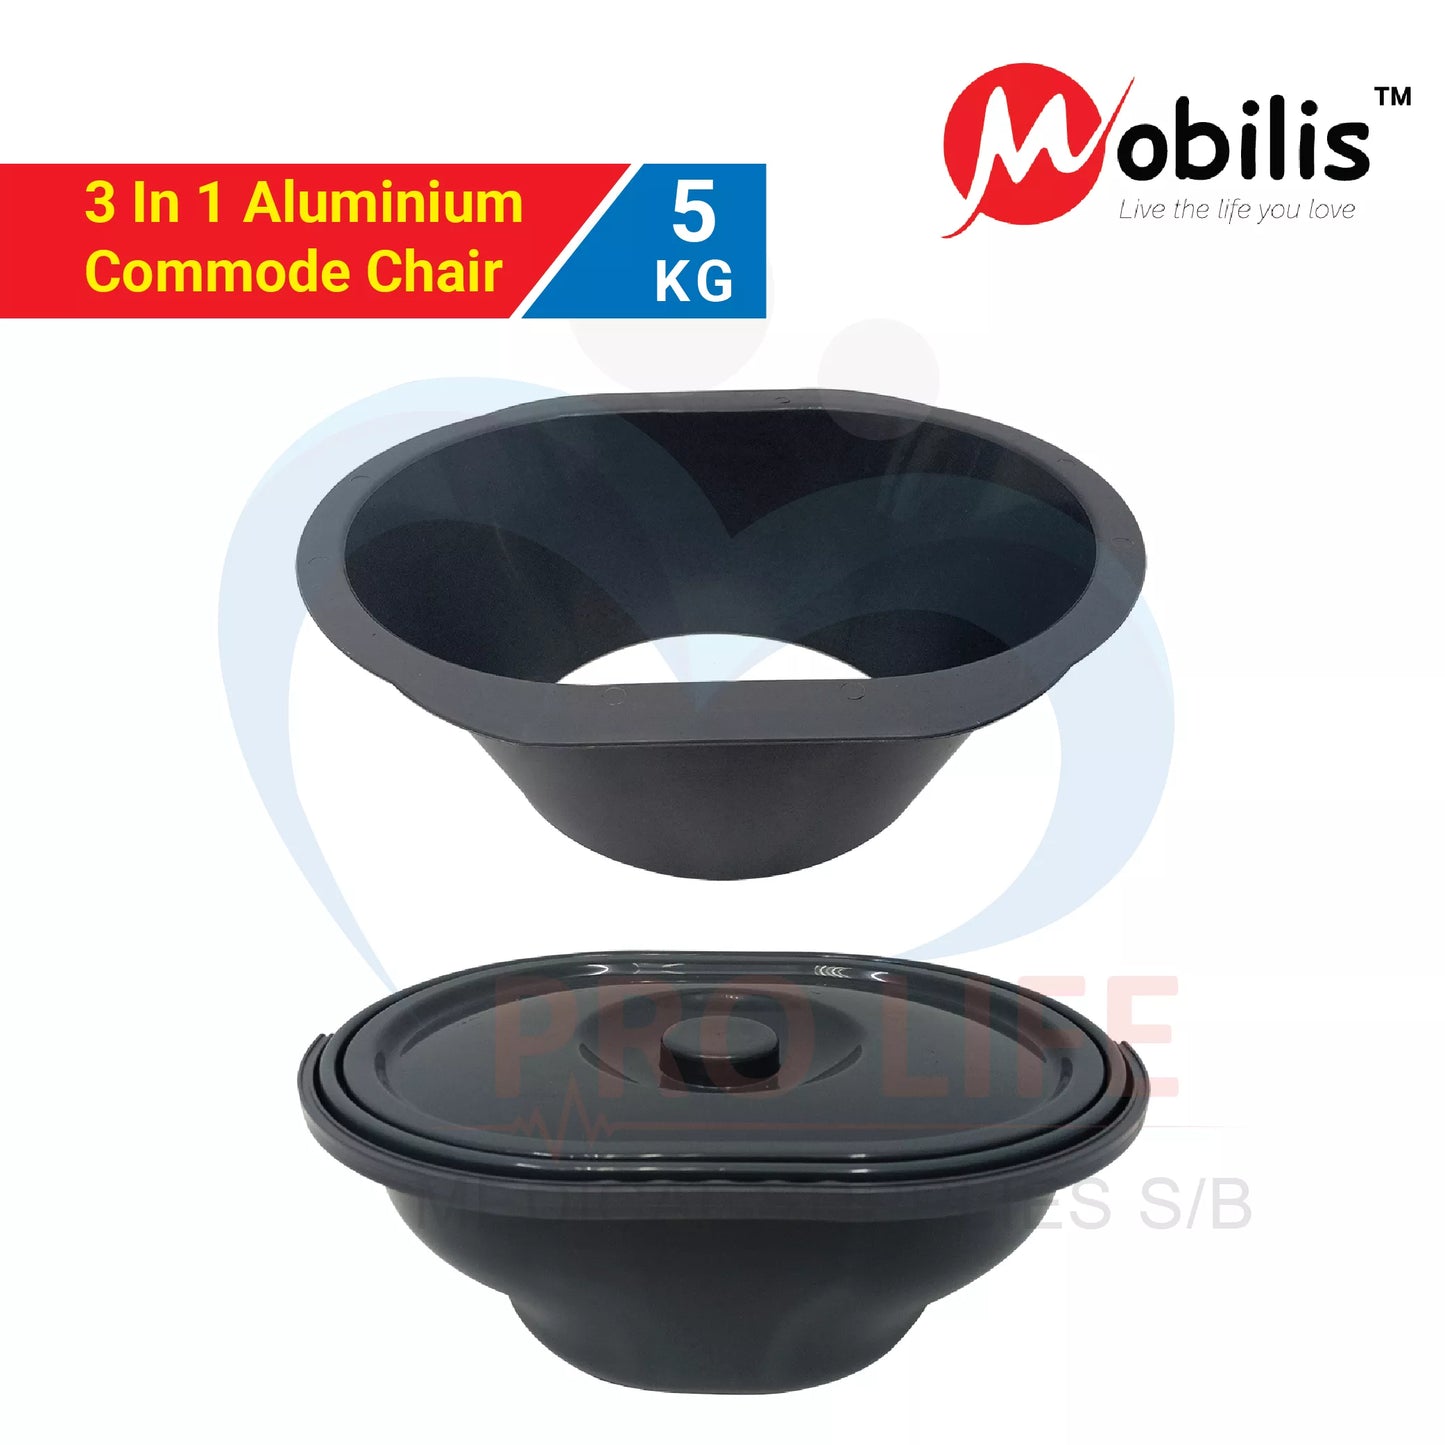 3 In 1 Aluminum Commode Chair MO-894LX